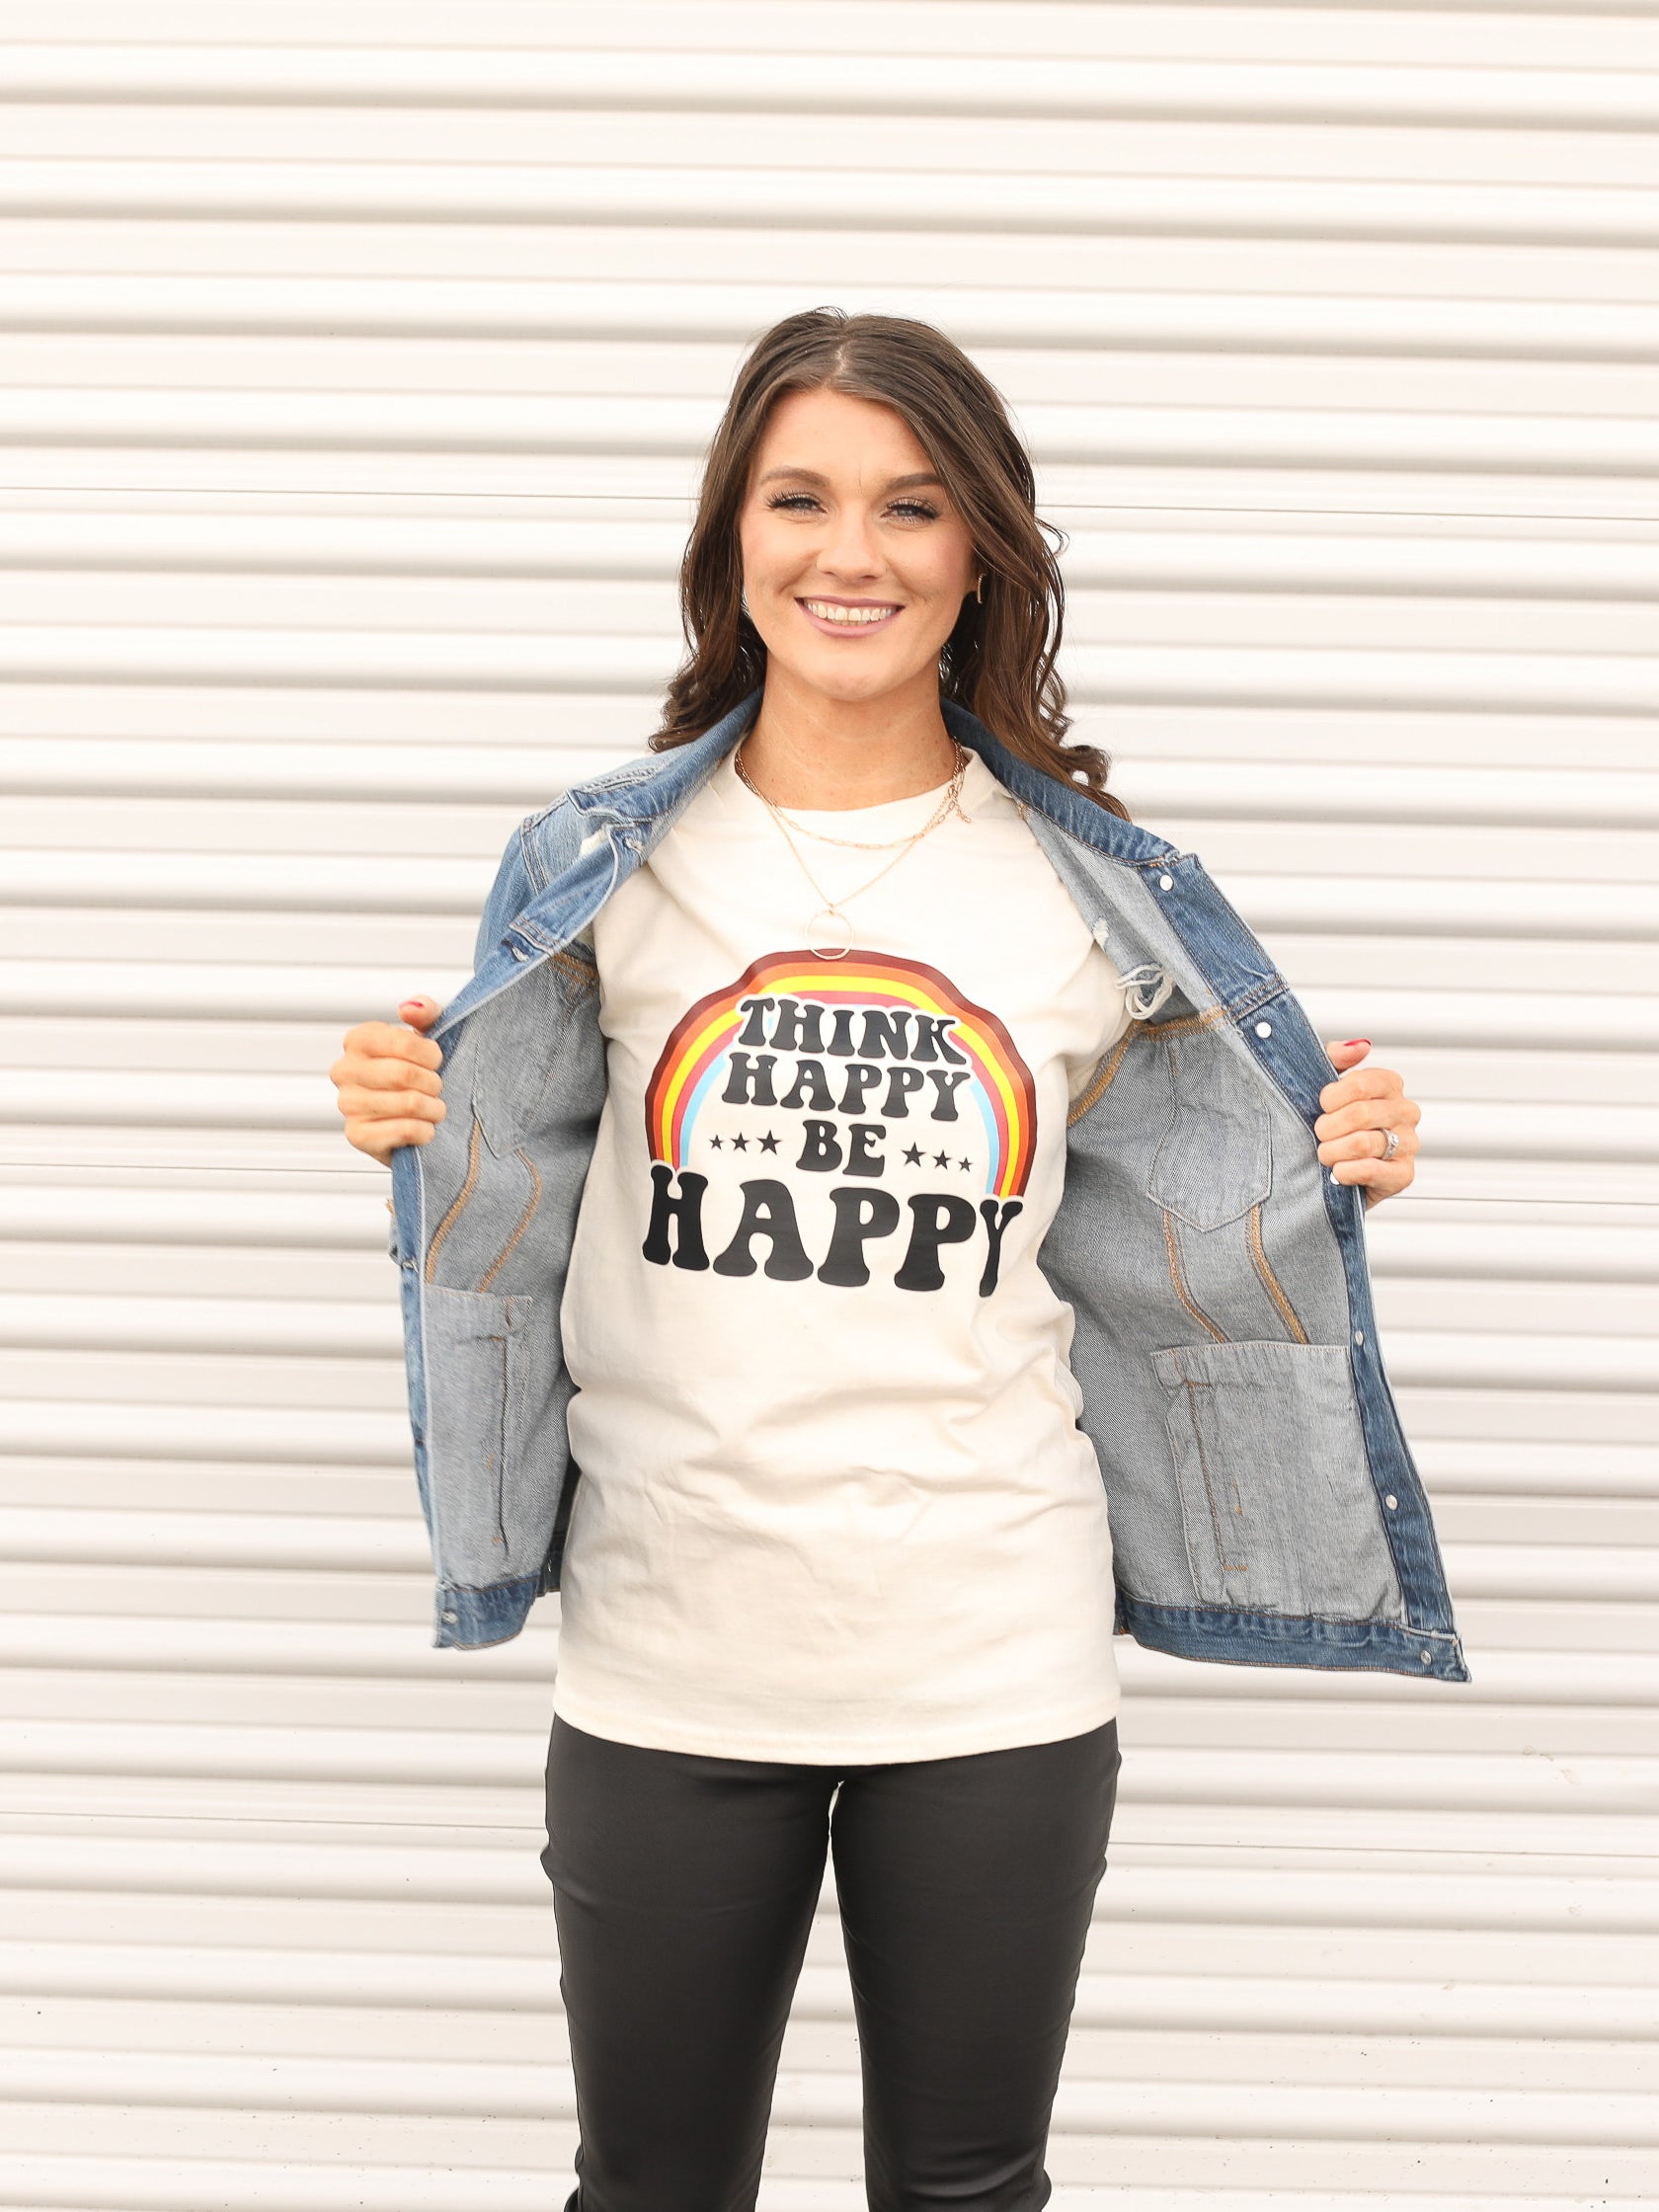 Graphic tee with "Think happy by happy" and a rainbow